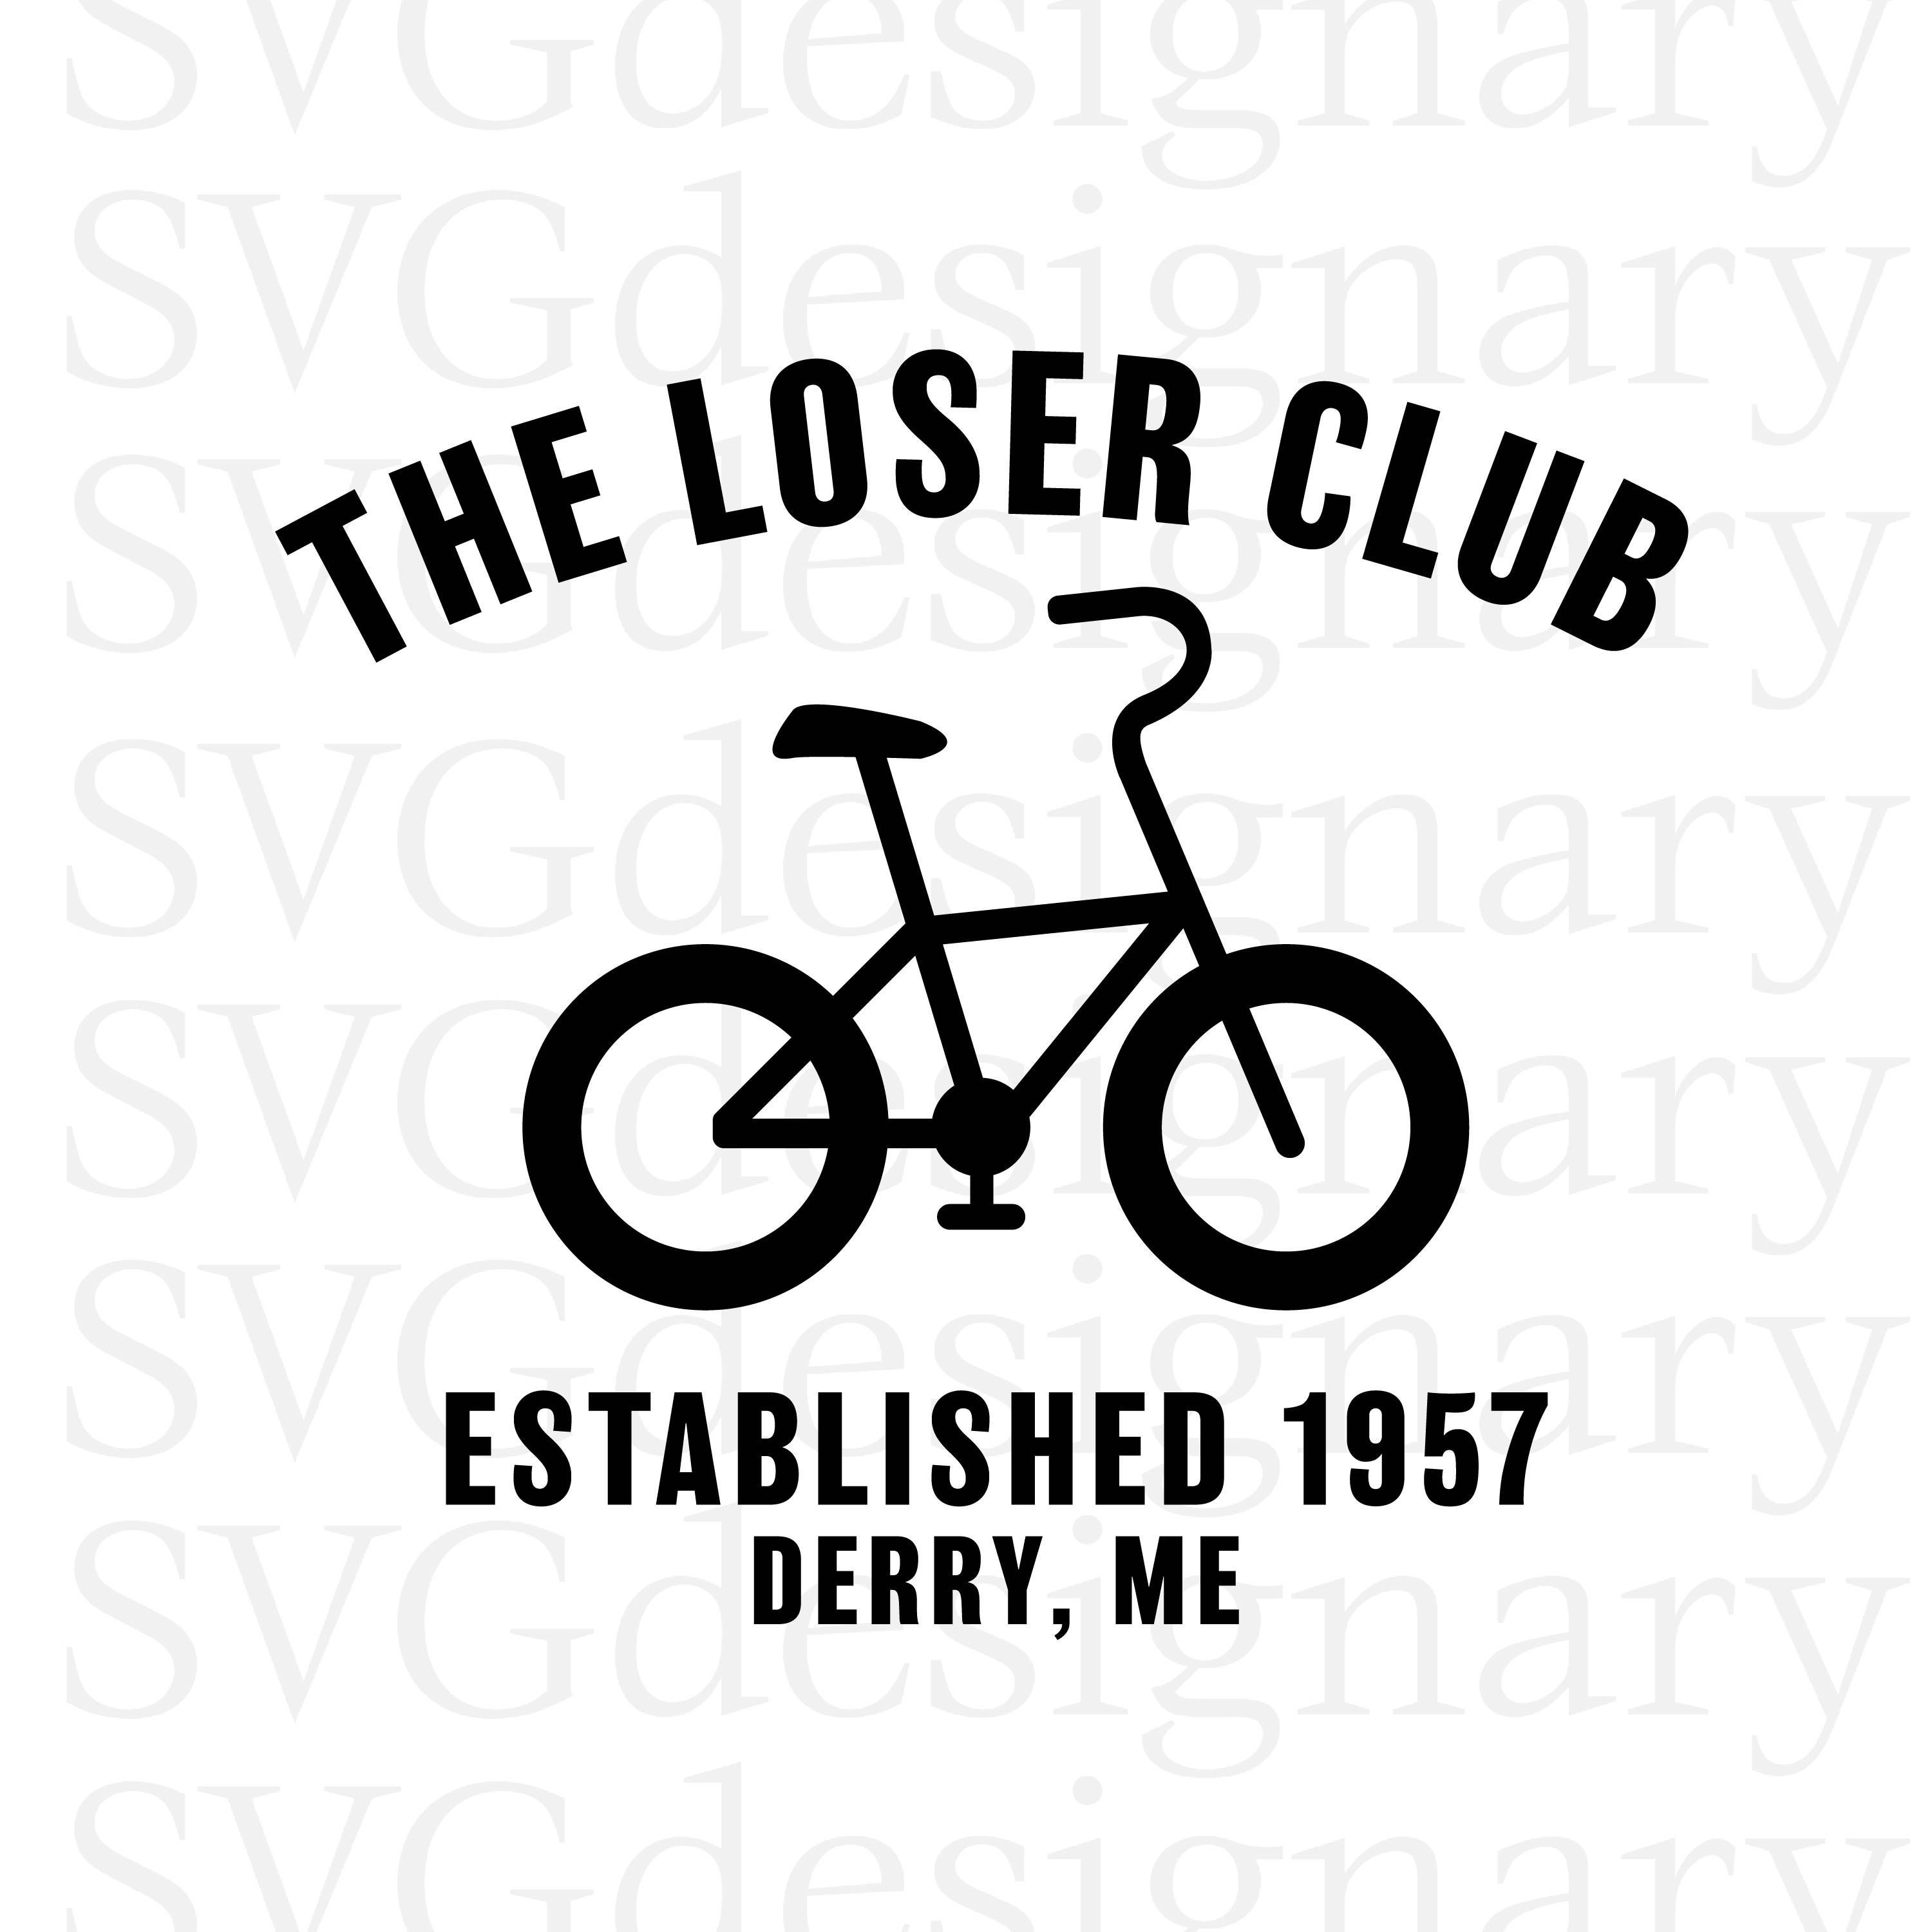 The Losers Club bicycle established 1957 Derry, ME Stephen King's